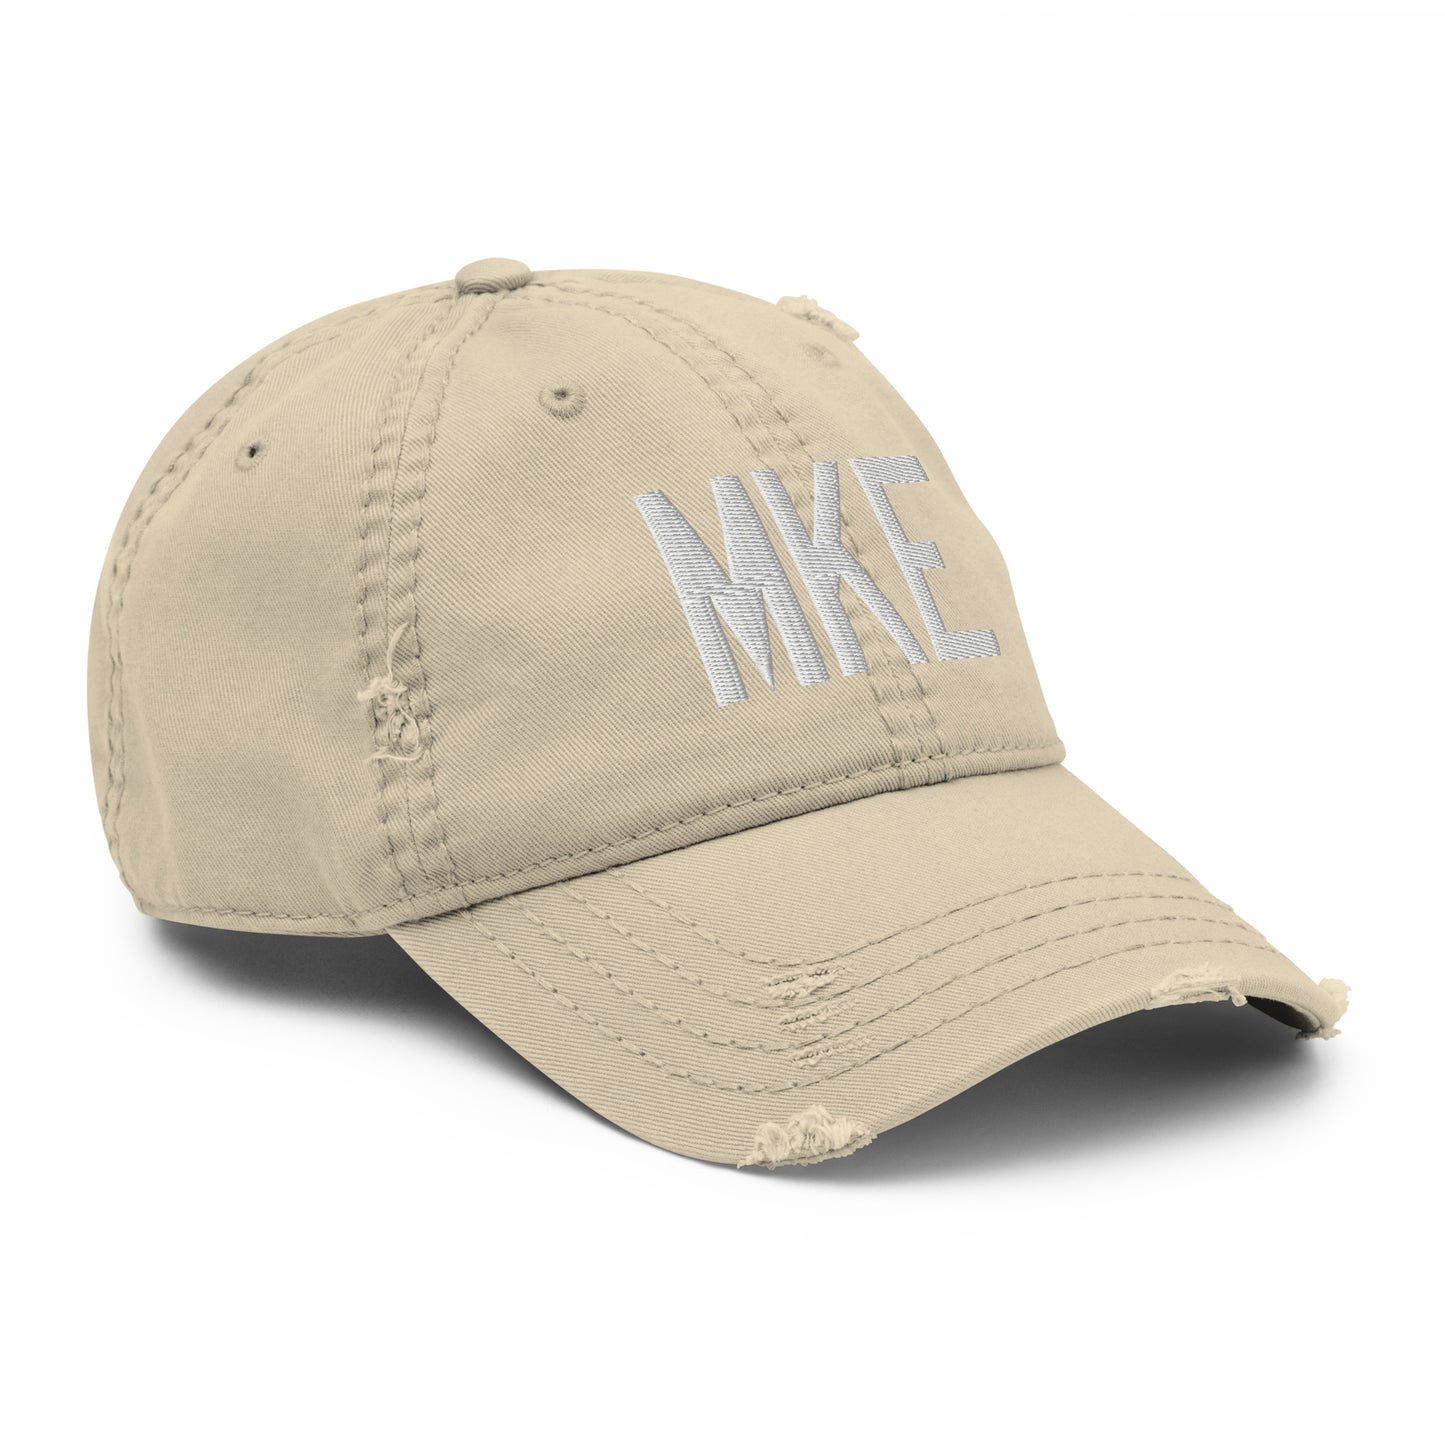 Airport Code Distressed Hat - White • MKE Milwaukee • YHM Designs - Image 20